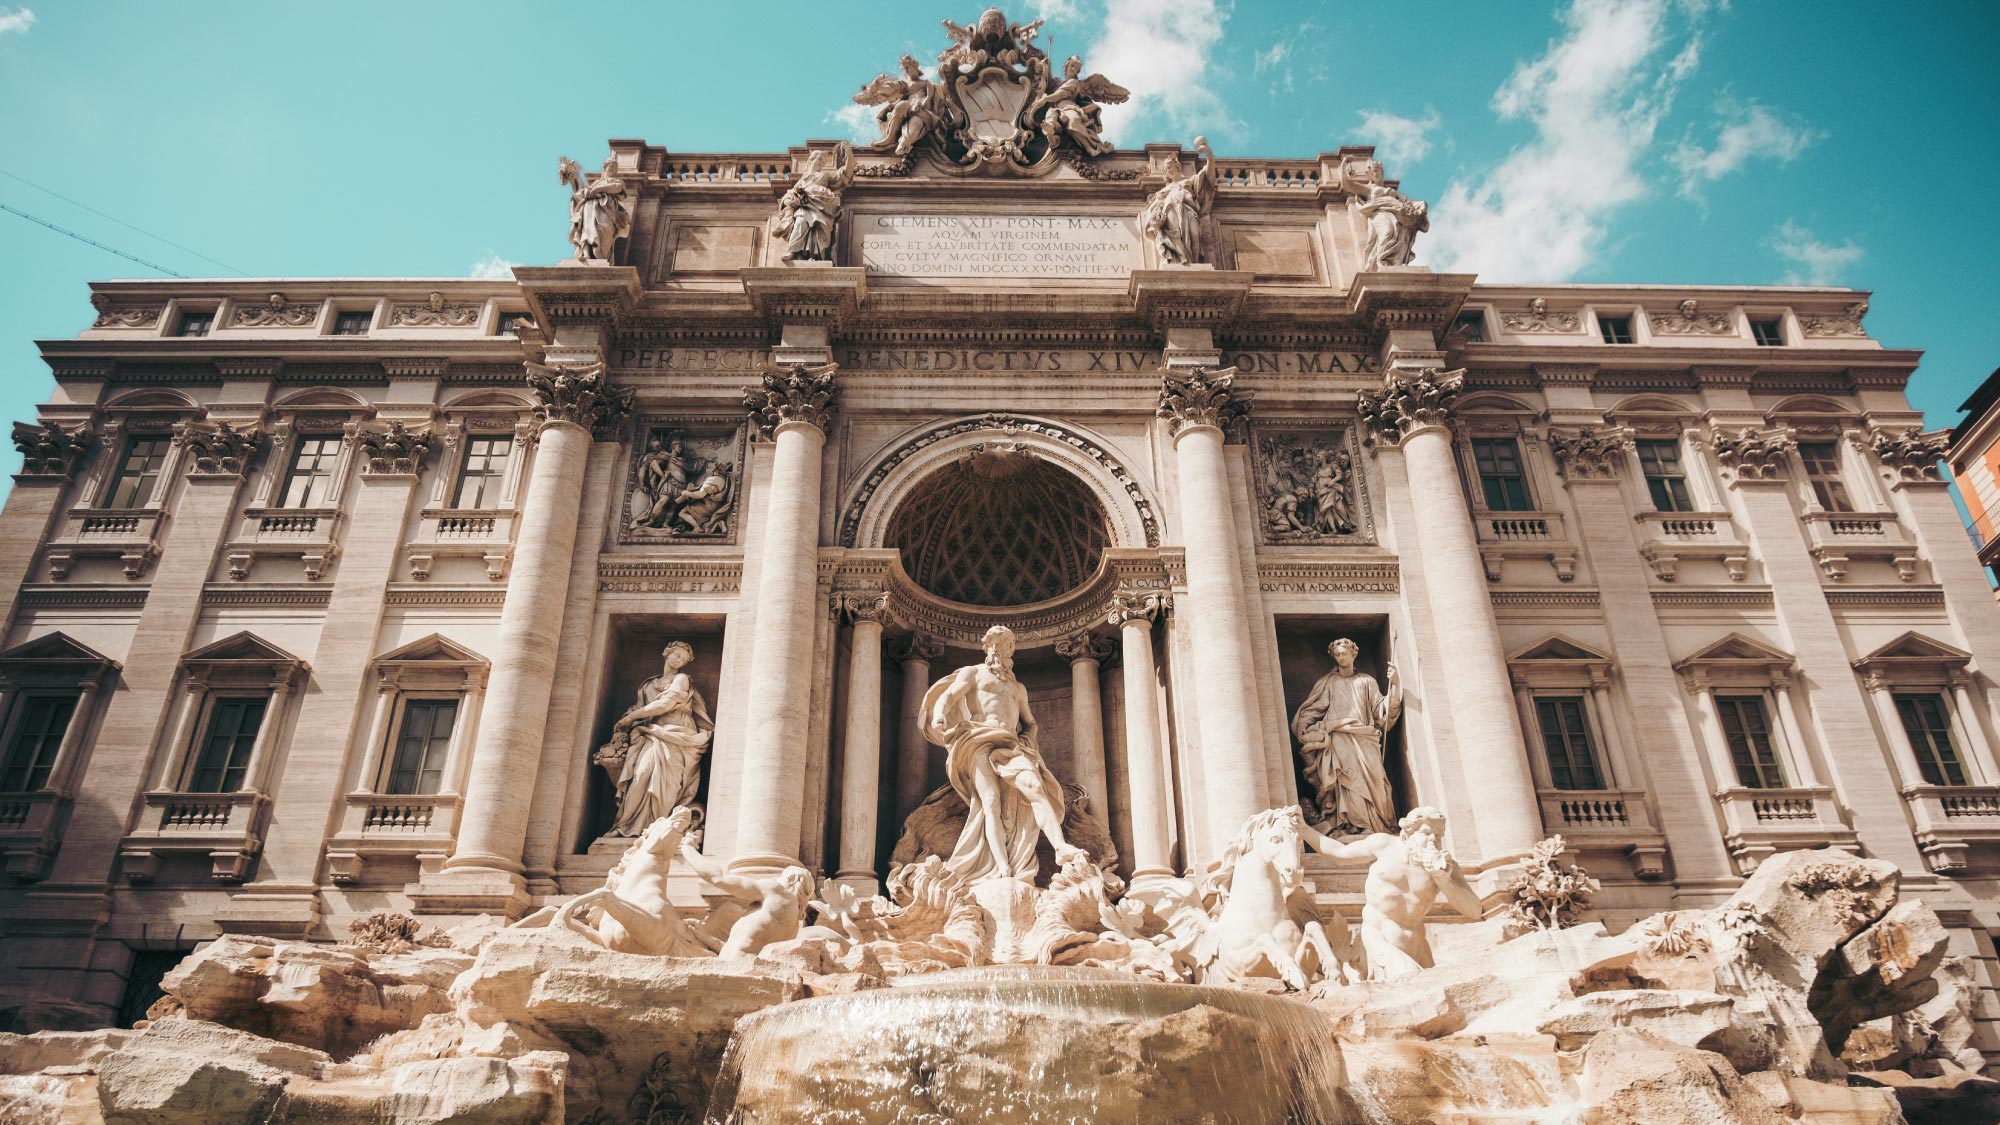 Front view of the Trevi Fountain in Rome